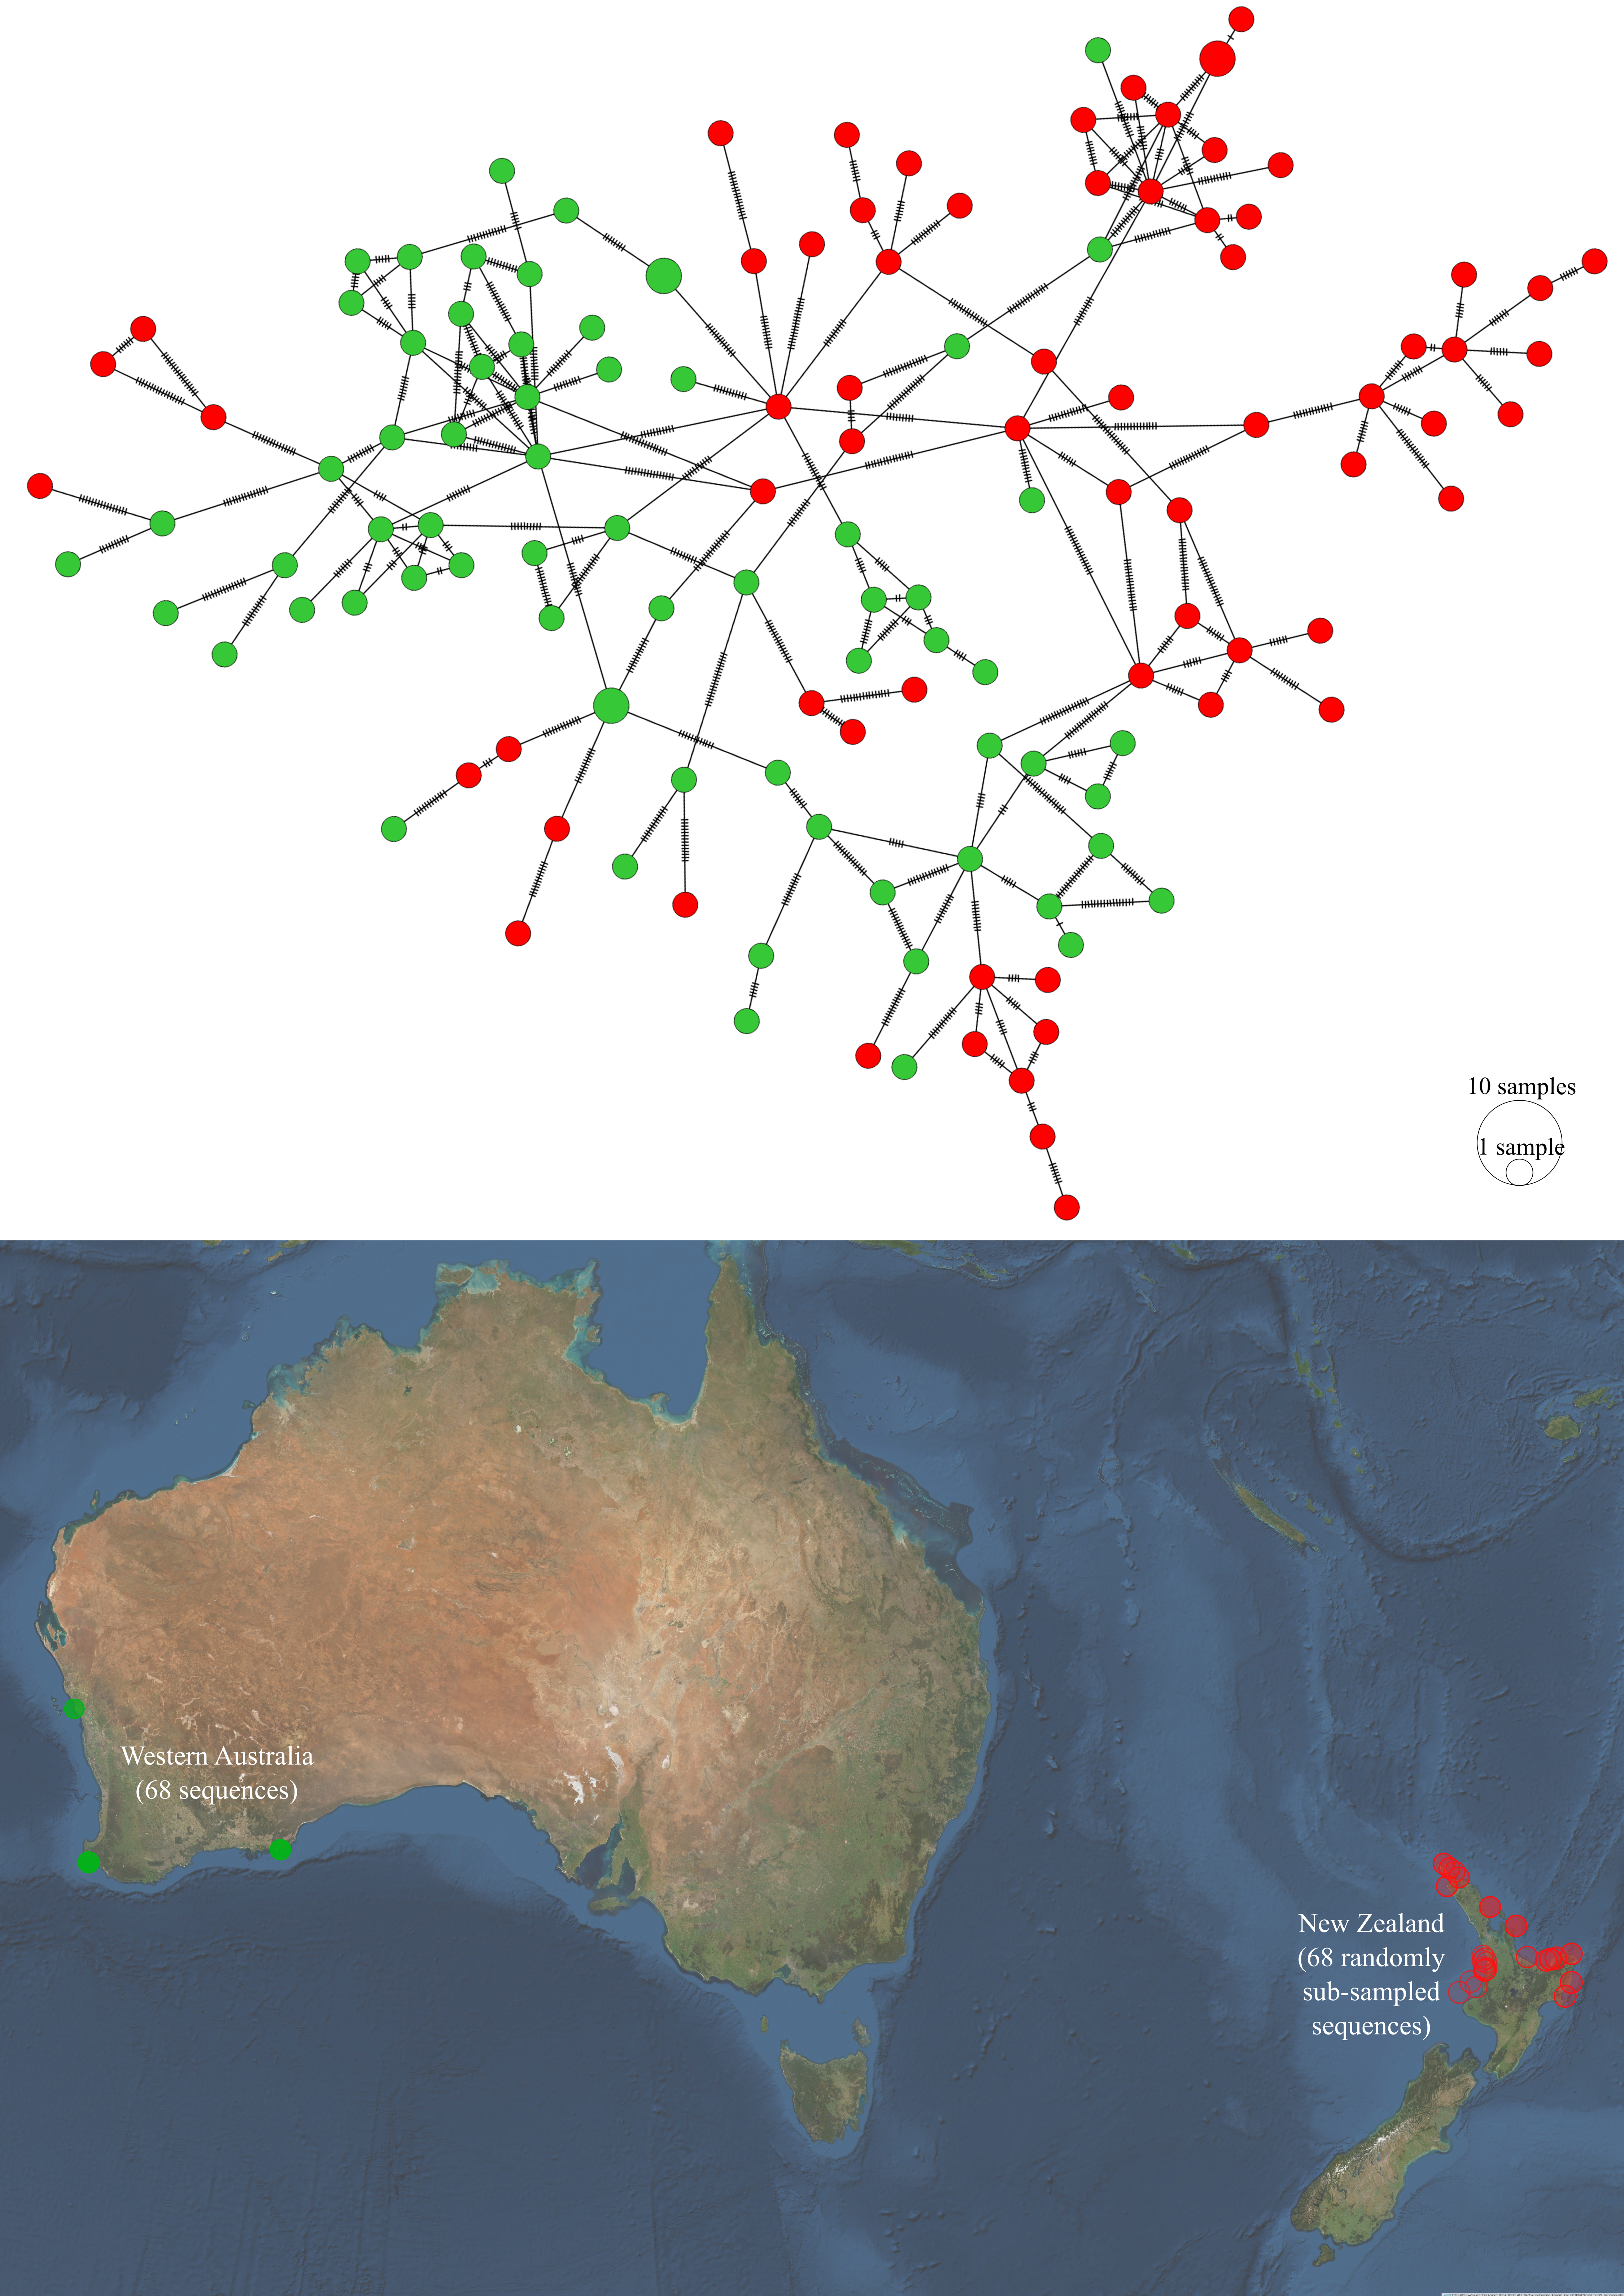 Haplotype network and sampling locations of *P. georgianus* from New Zealand and Western Australia.